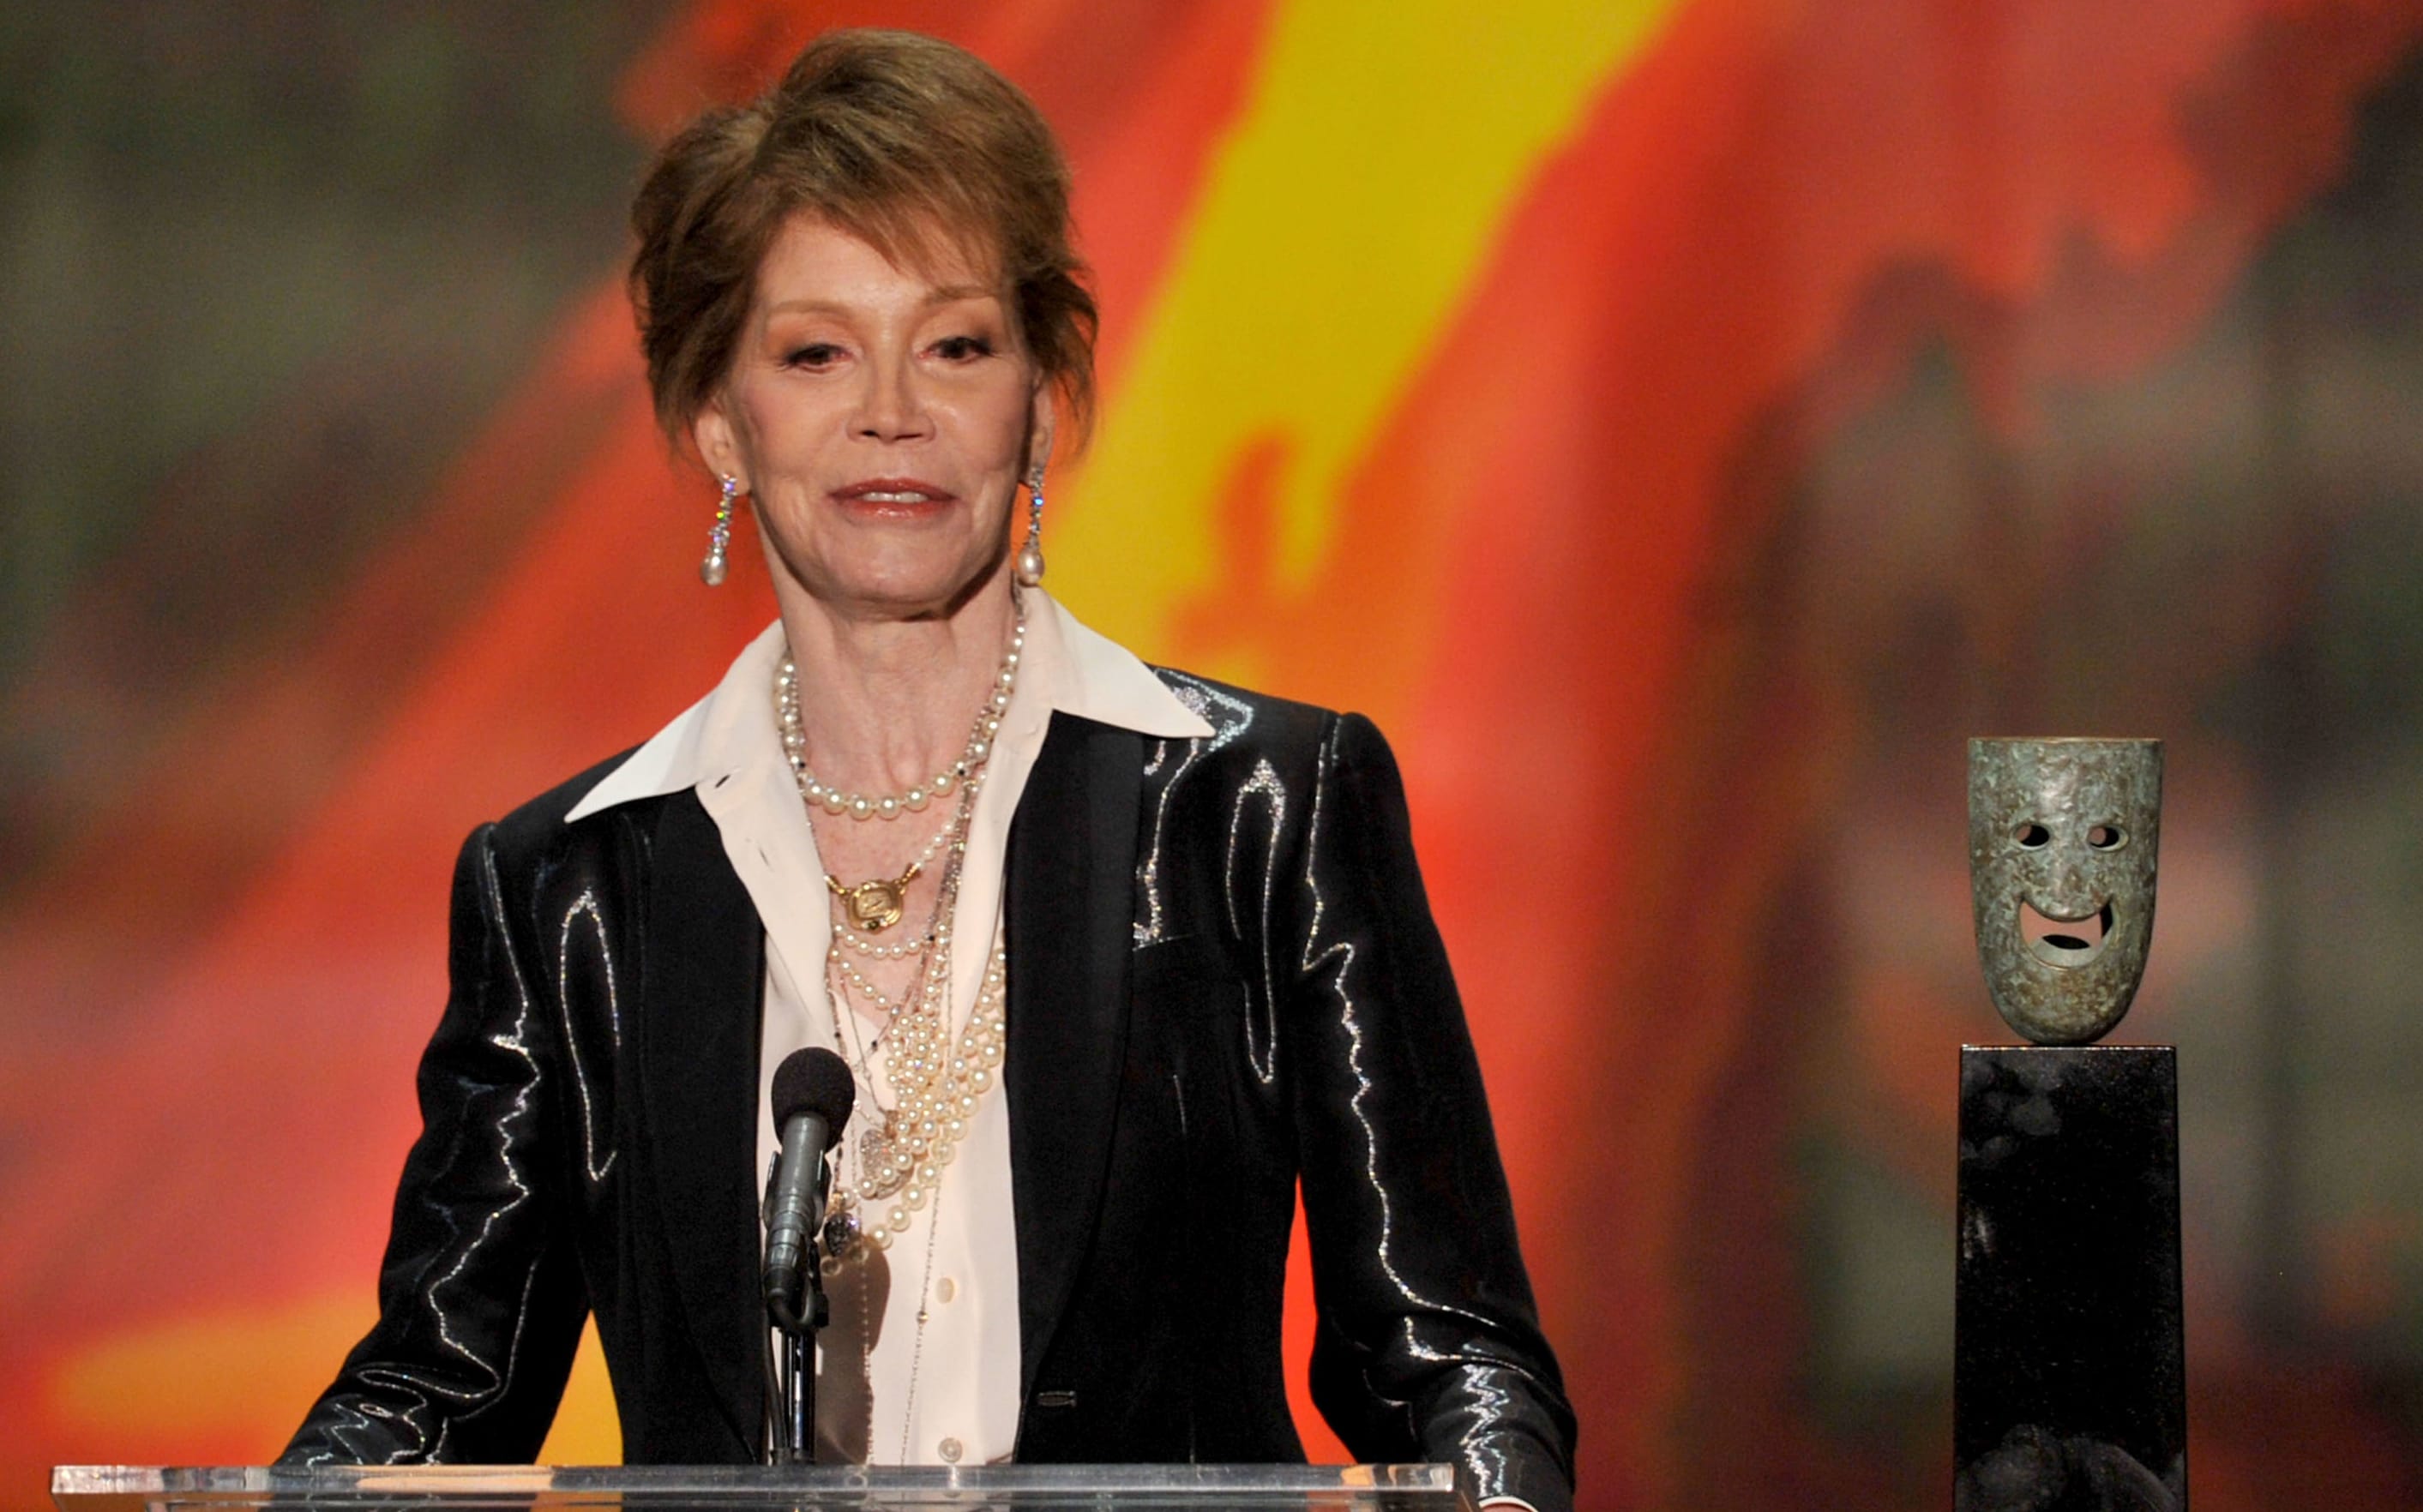 Mary Tyler Moore accepting a life achievement award at the Screen Actors Guild Awards, Los Angeles, in 2012.